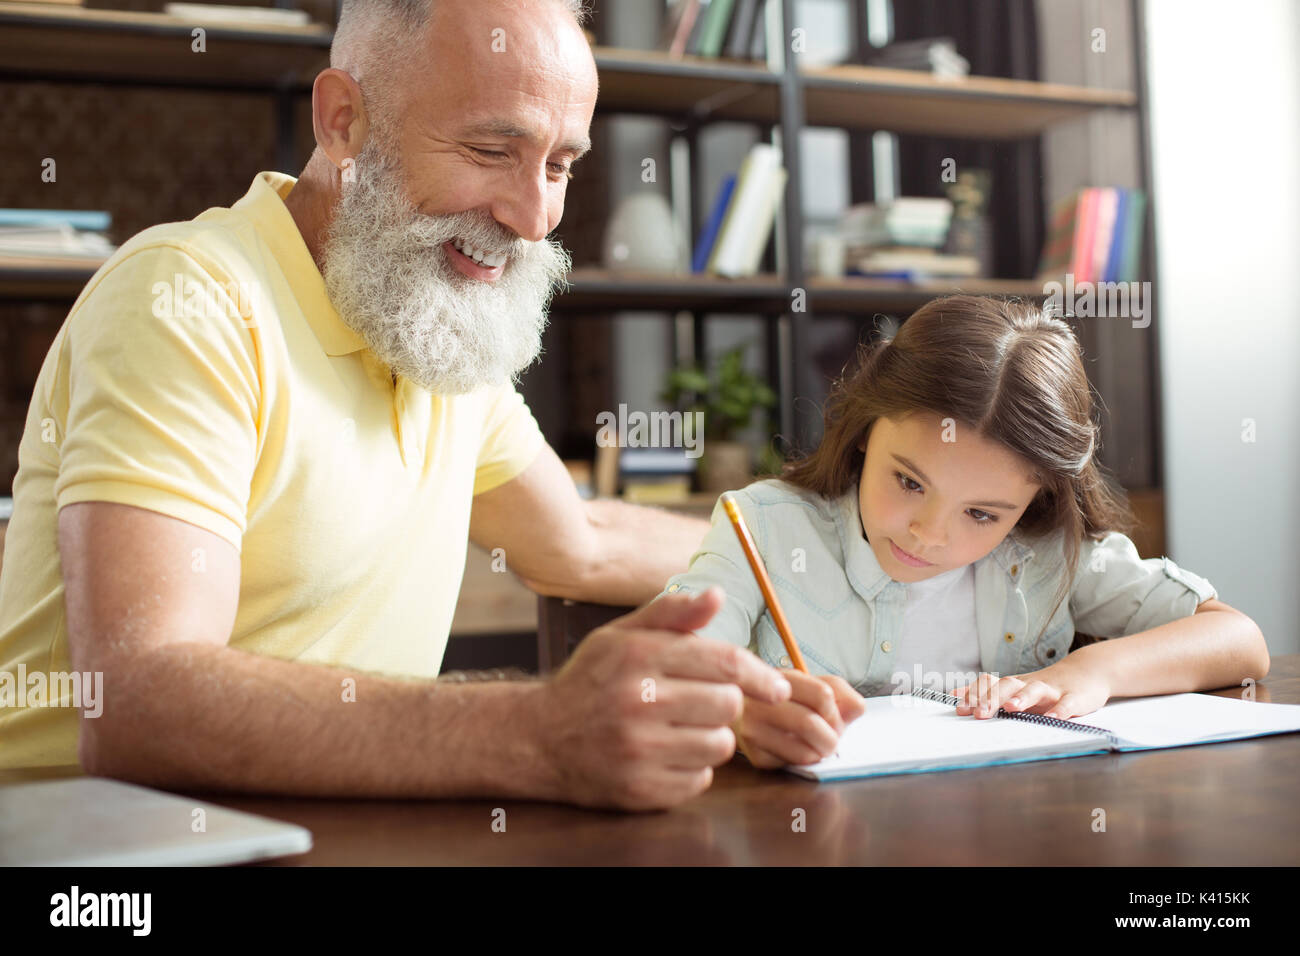 Smiling grandfather helping his granddaughter with homework Stock Photo